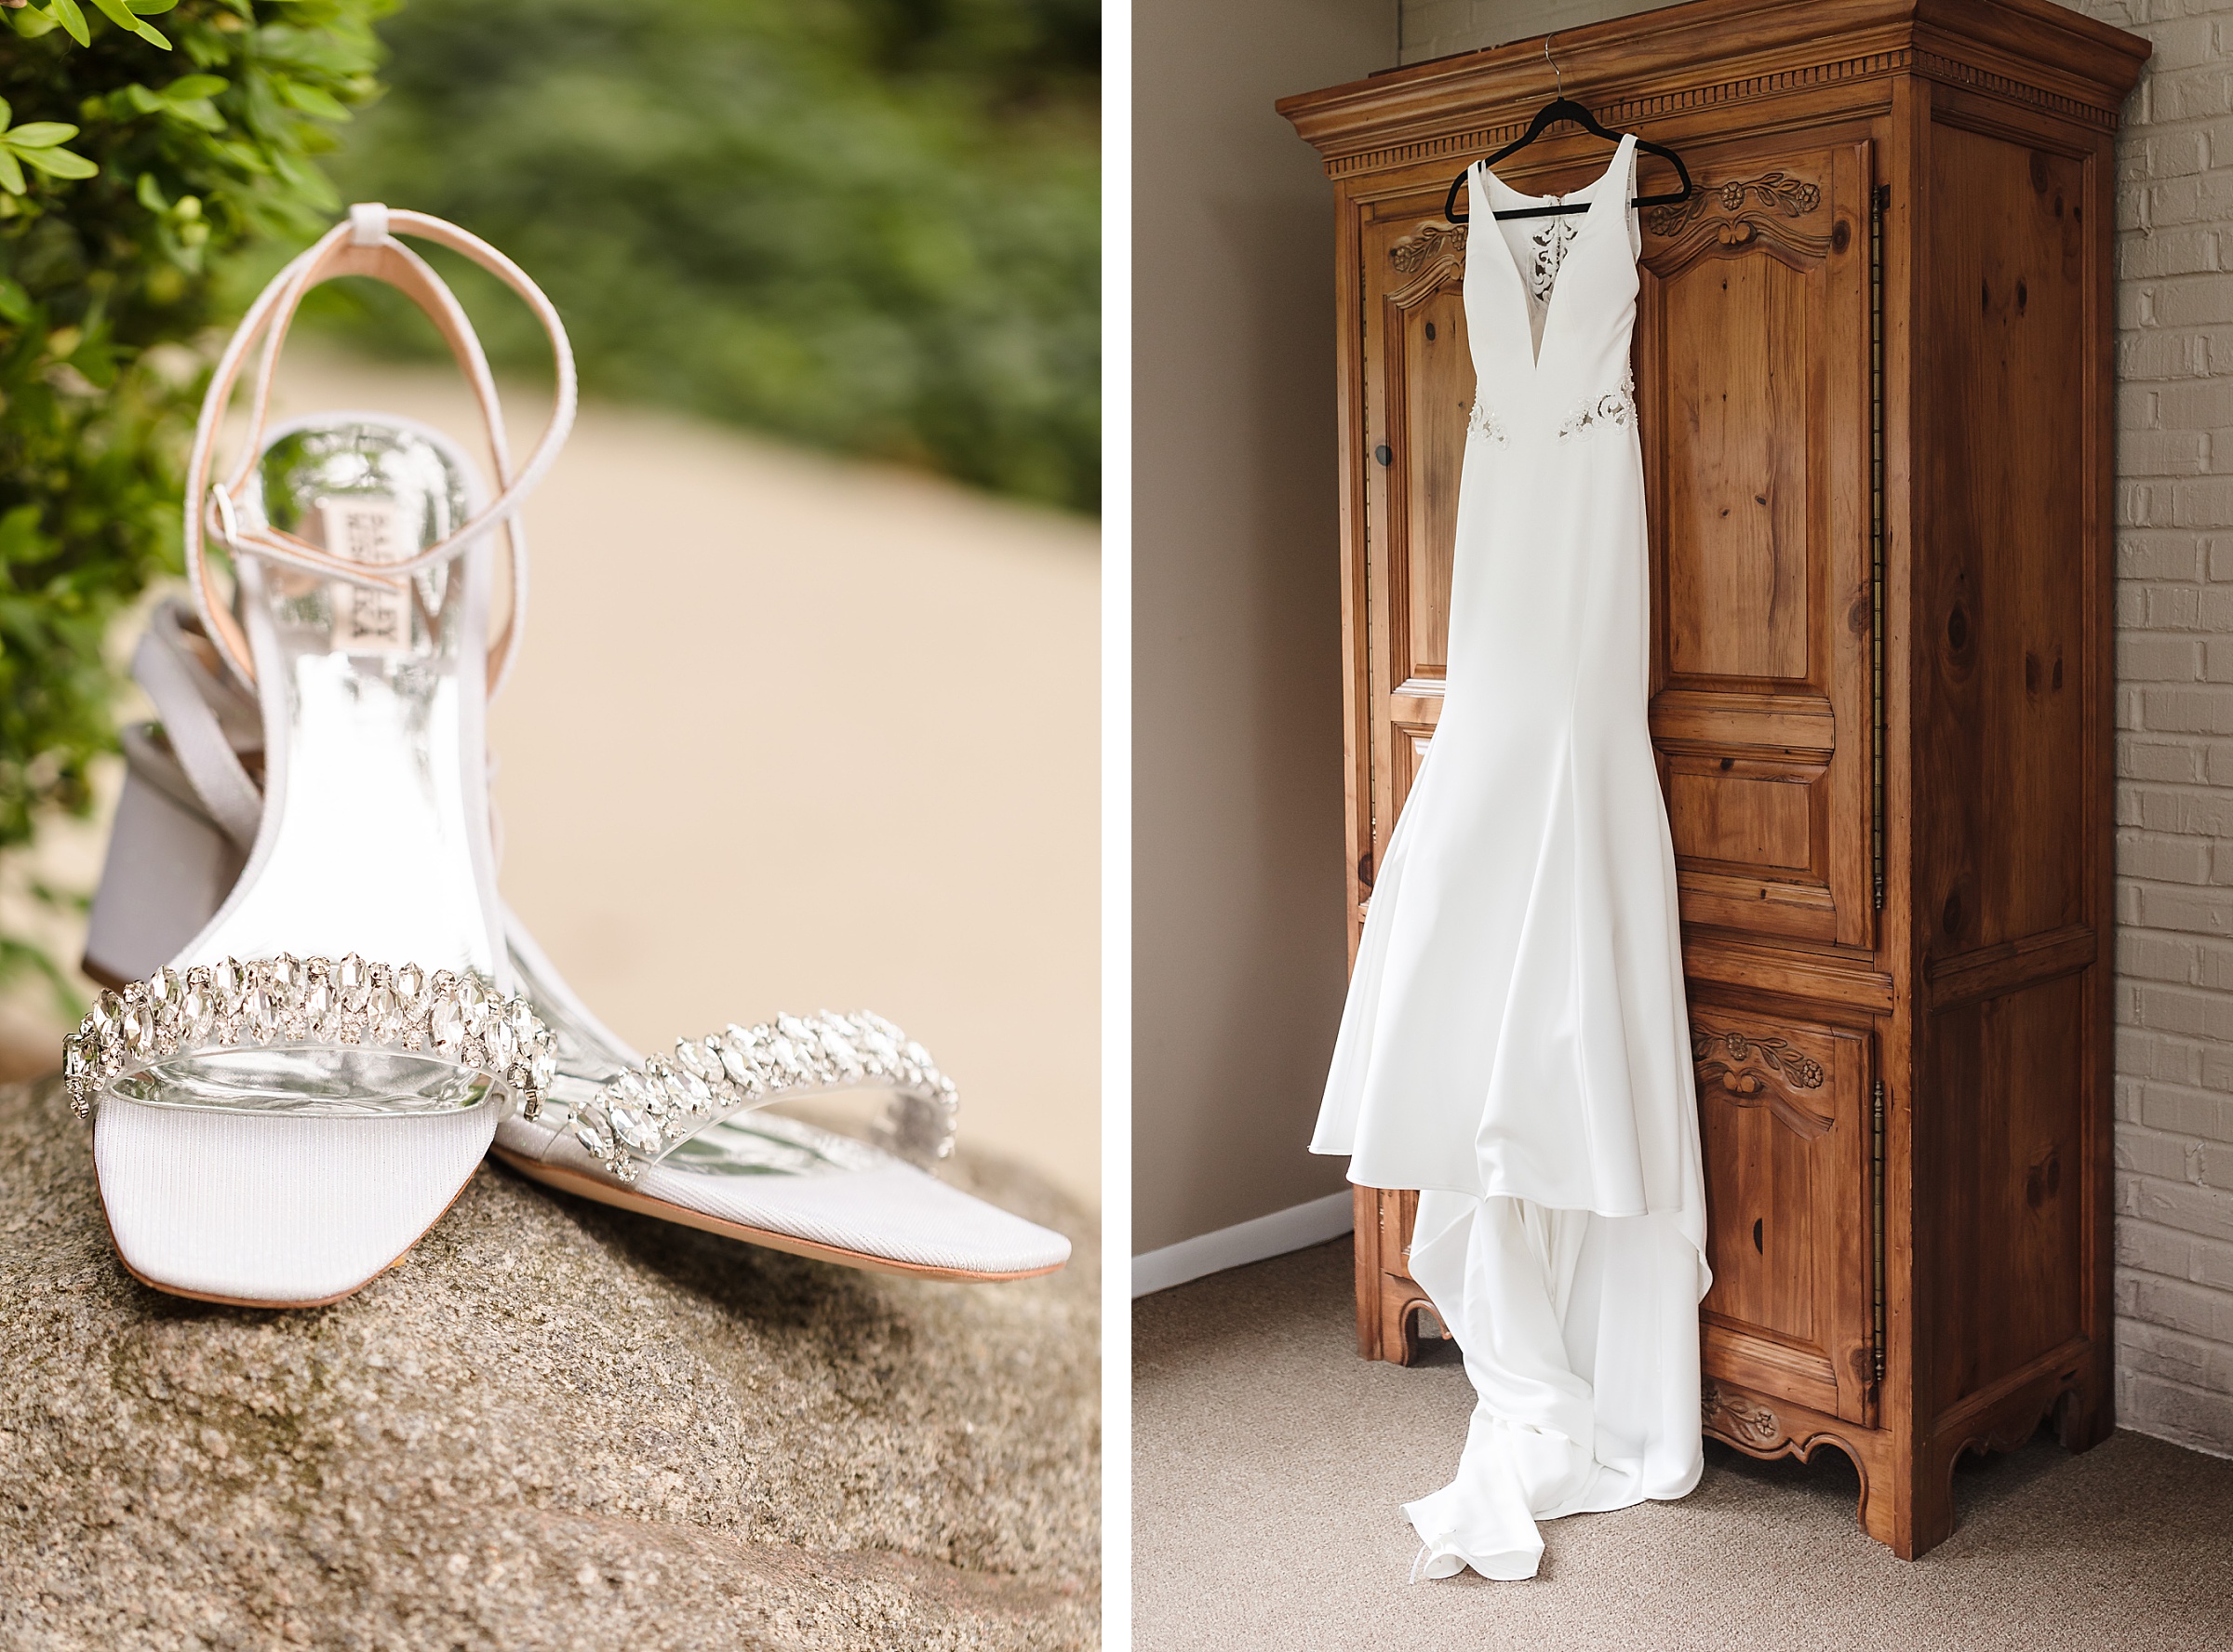 Bride's dress and shoes during a wedding at the Chevy Chase Country Club in Wheeling, Illinois.